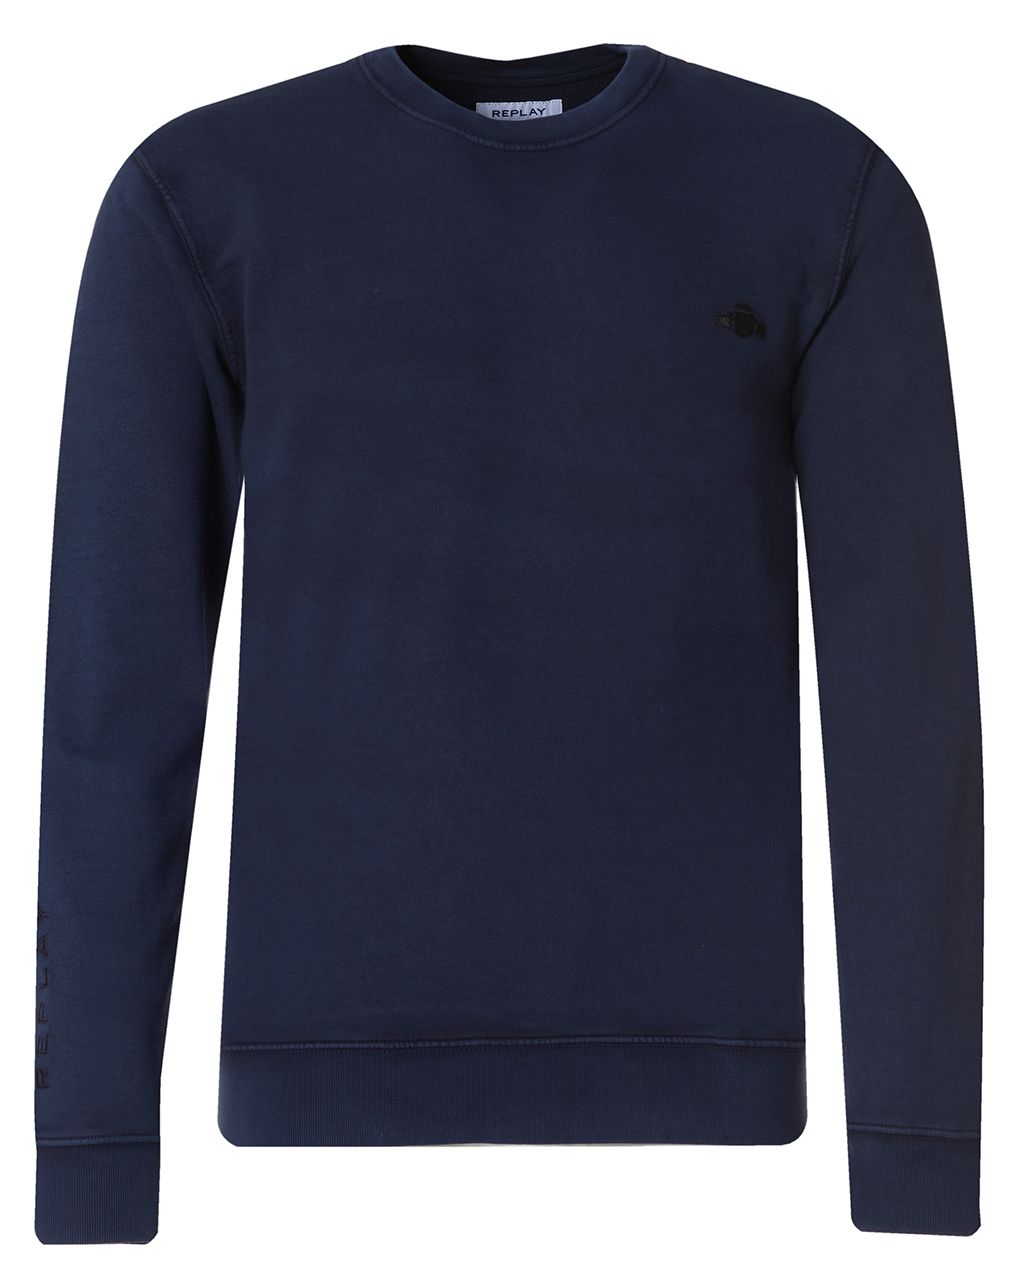 Replay Sweater Donker blauw 078258-001-L